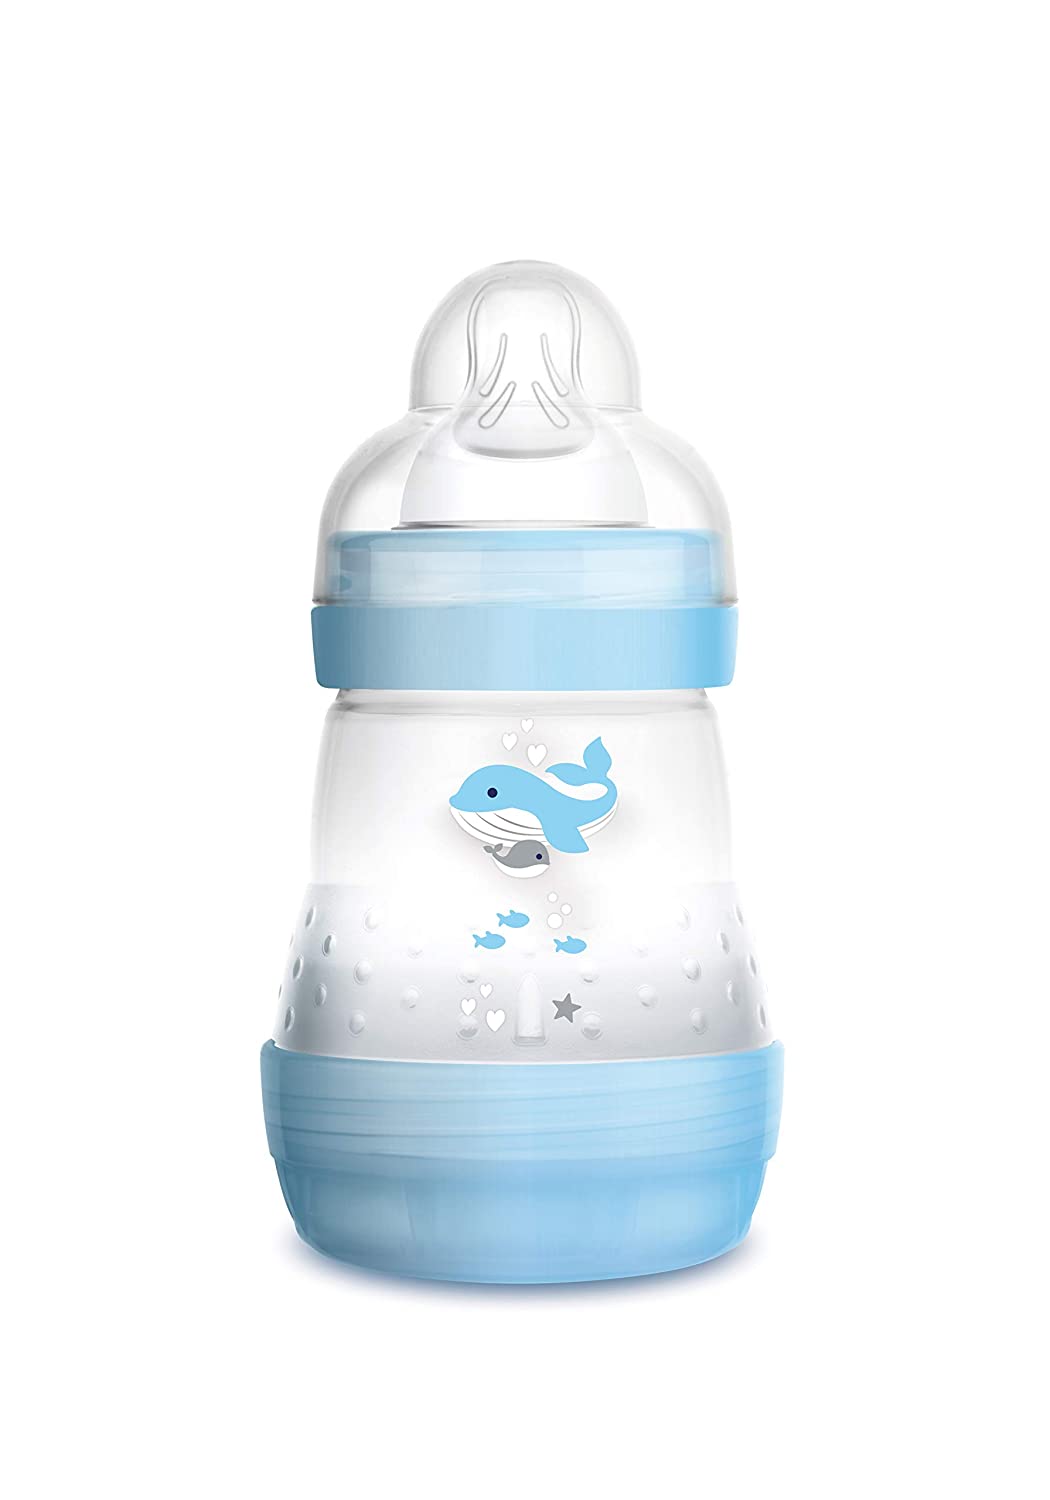 MAM Easy Start anti-colic baby bottle (160 ml), milk bottle with innovative base valve to prevent colic, baby’s drinking bottle with size 1 teat, from birth, whale, blue